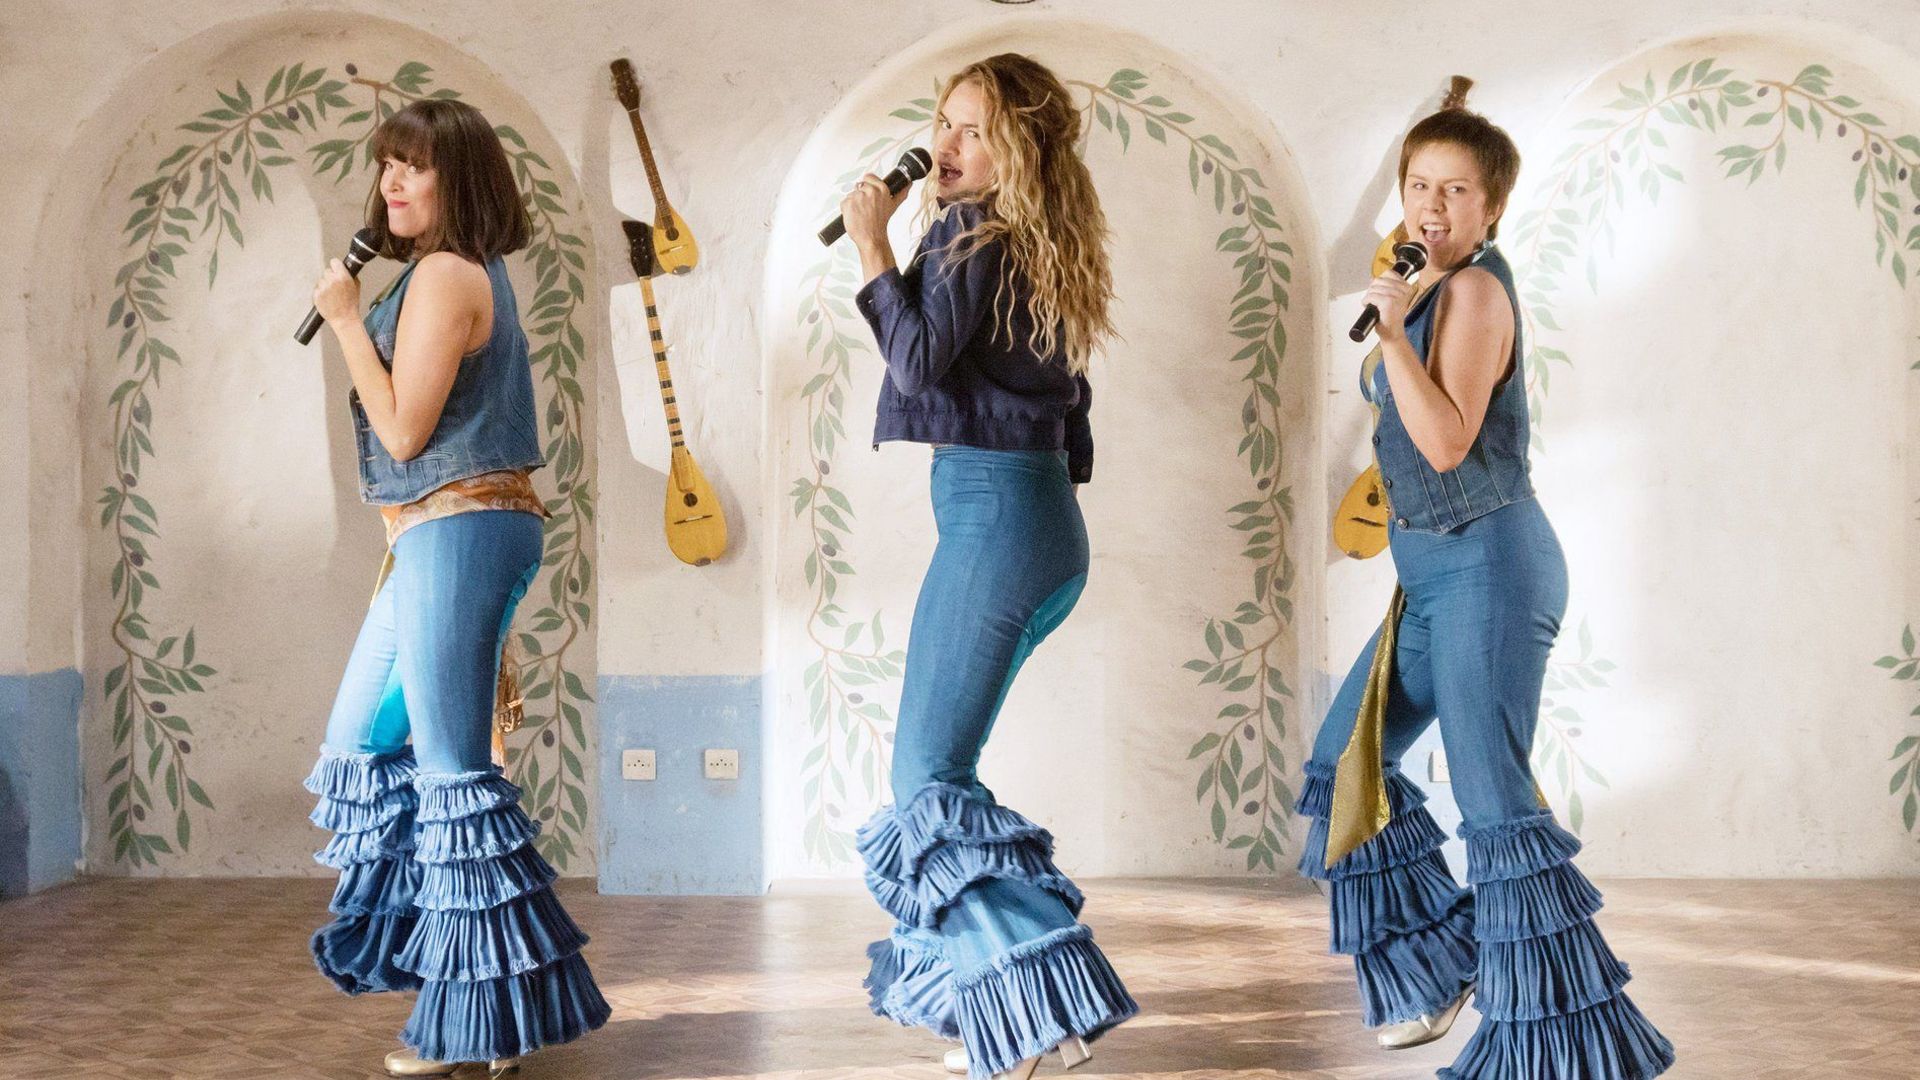 Mamma mia here we go again is the fort movie we need right now